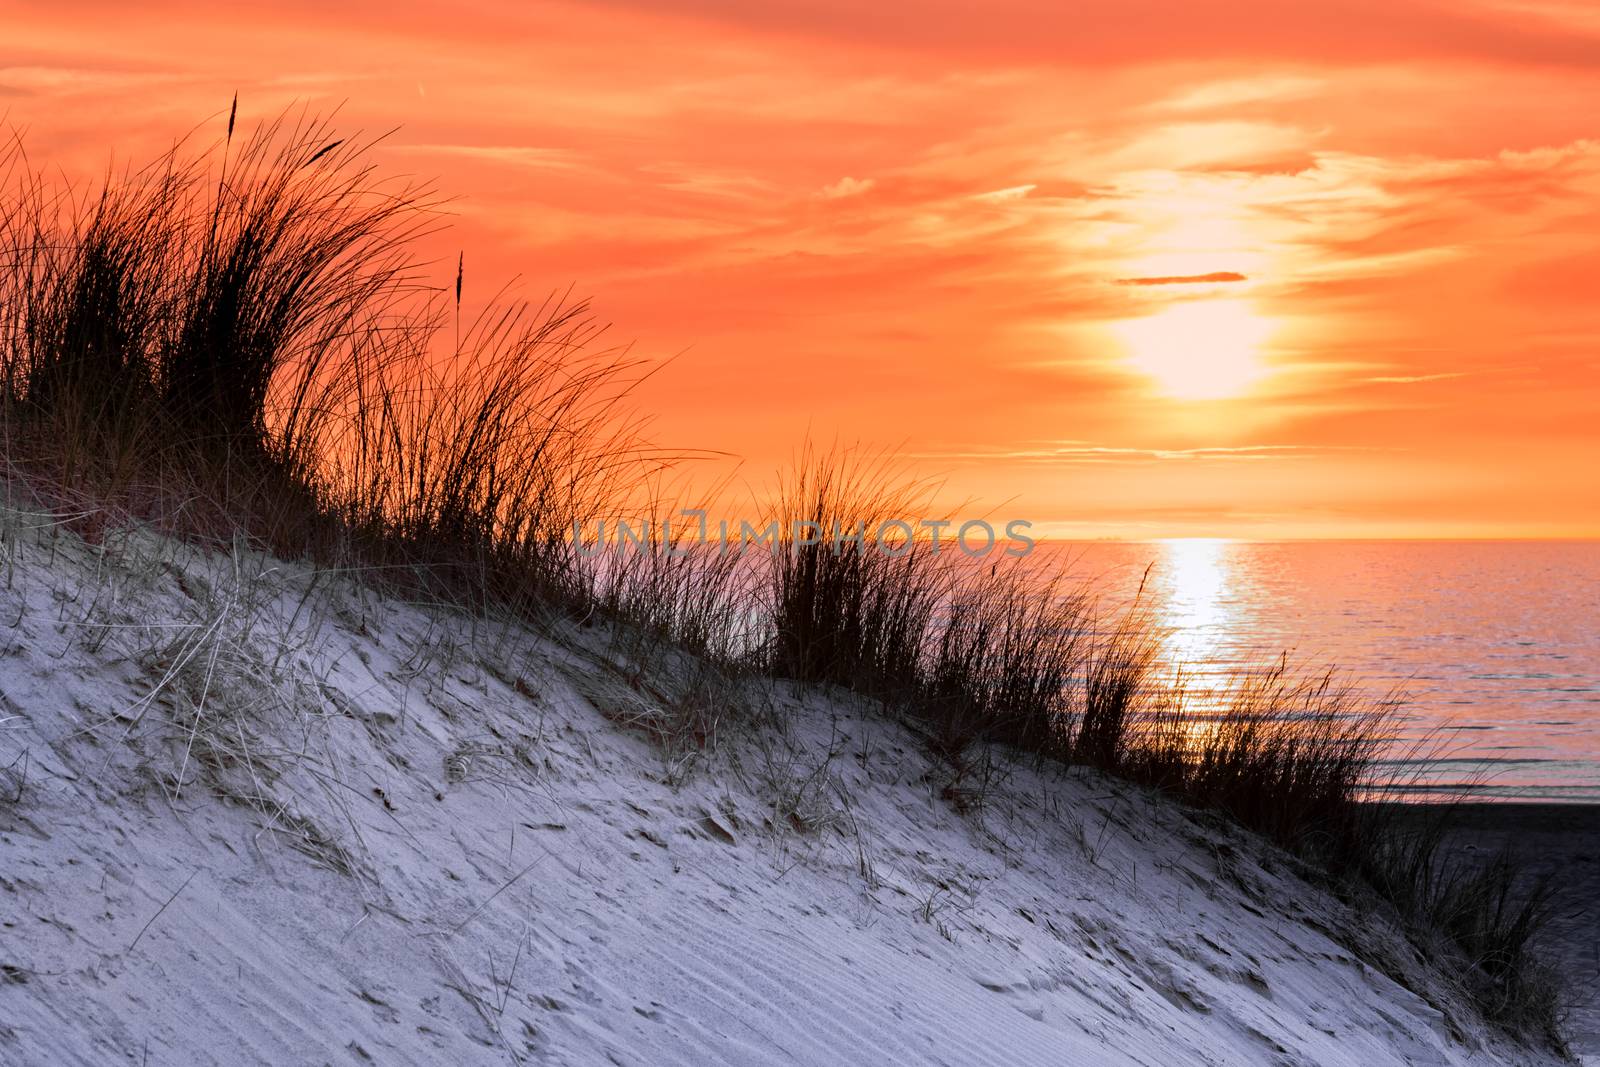 Orange sunset with dune and sea by BenSchonewille